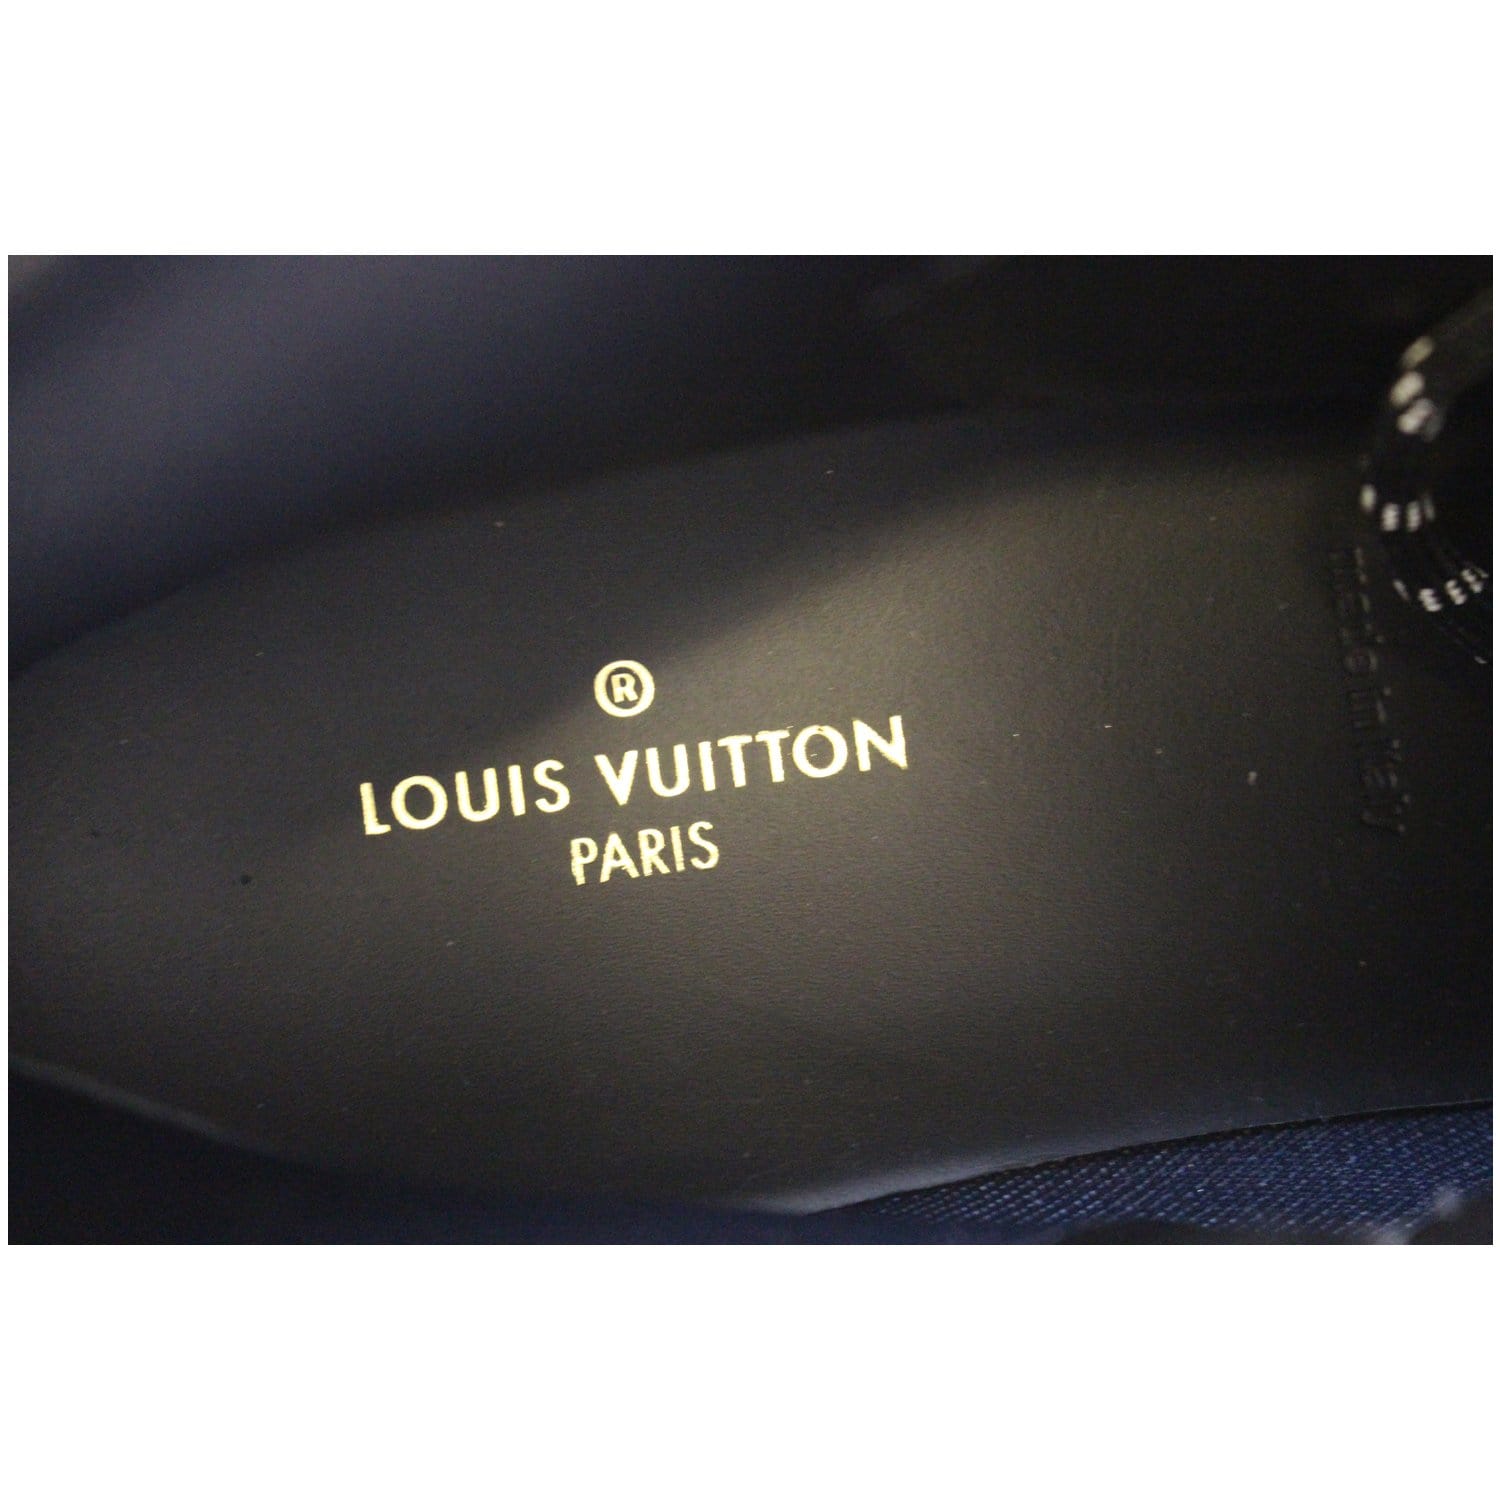 Buy Louis Vuitton Outland Shoes: New Releases & Iconic Styles